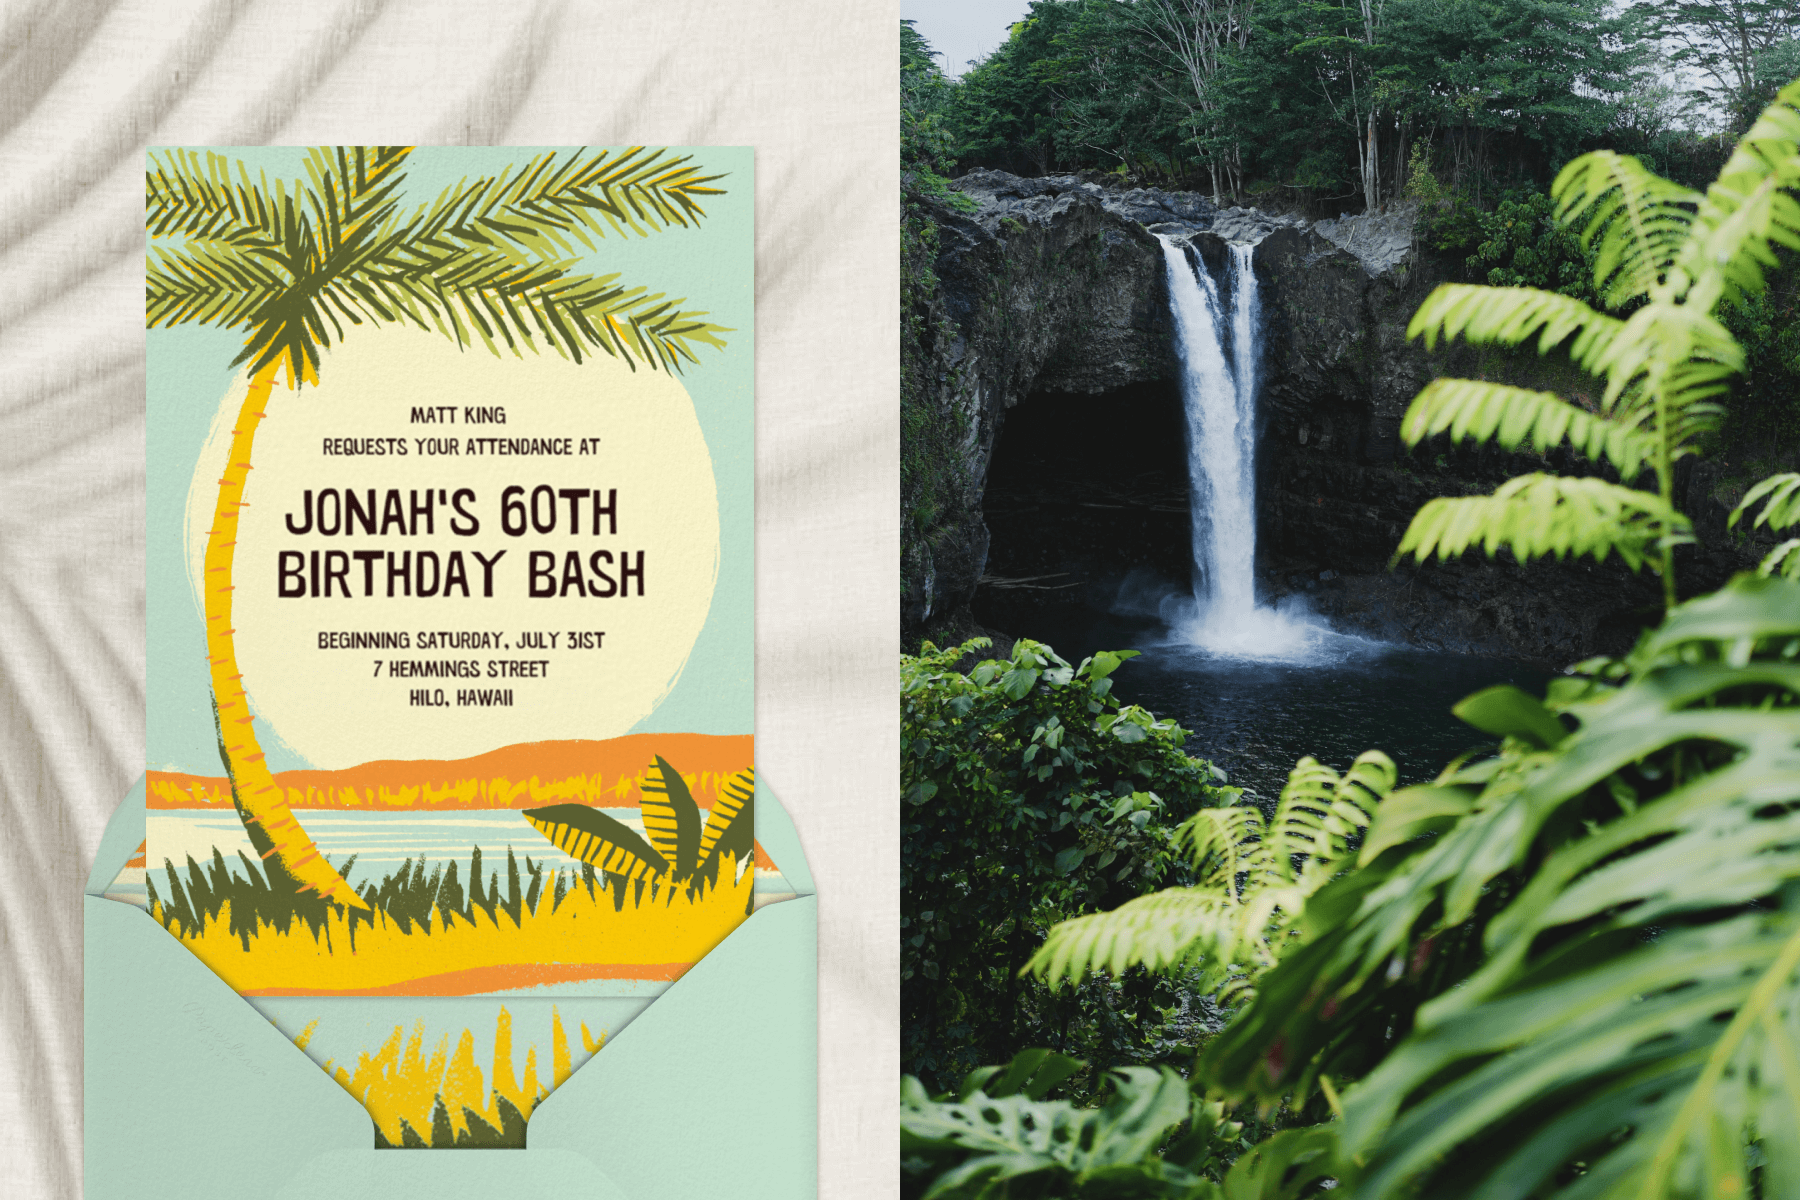 Left: “Seaside Sunrise” invitation by Paperless Post featuring a palm tree and beach scene on an orange background; Right: Photo of a lush tropical waterfall.